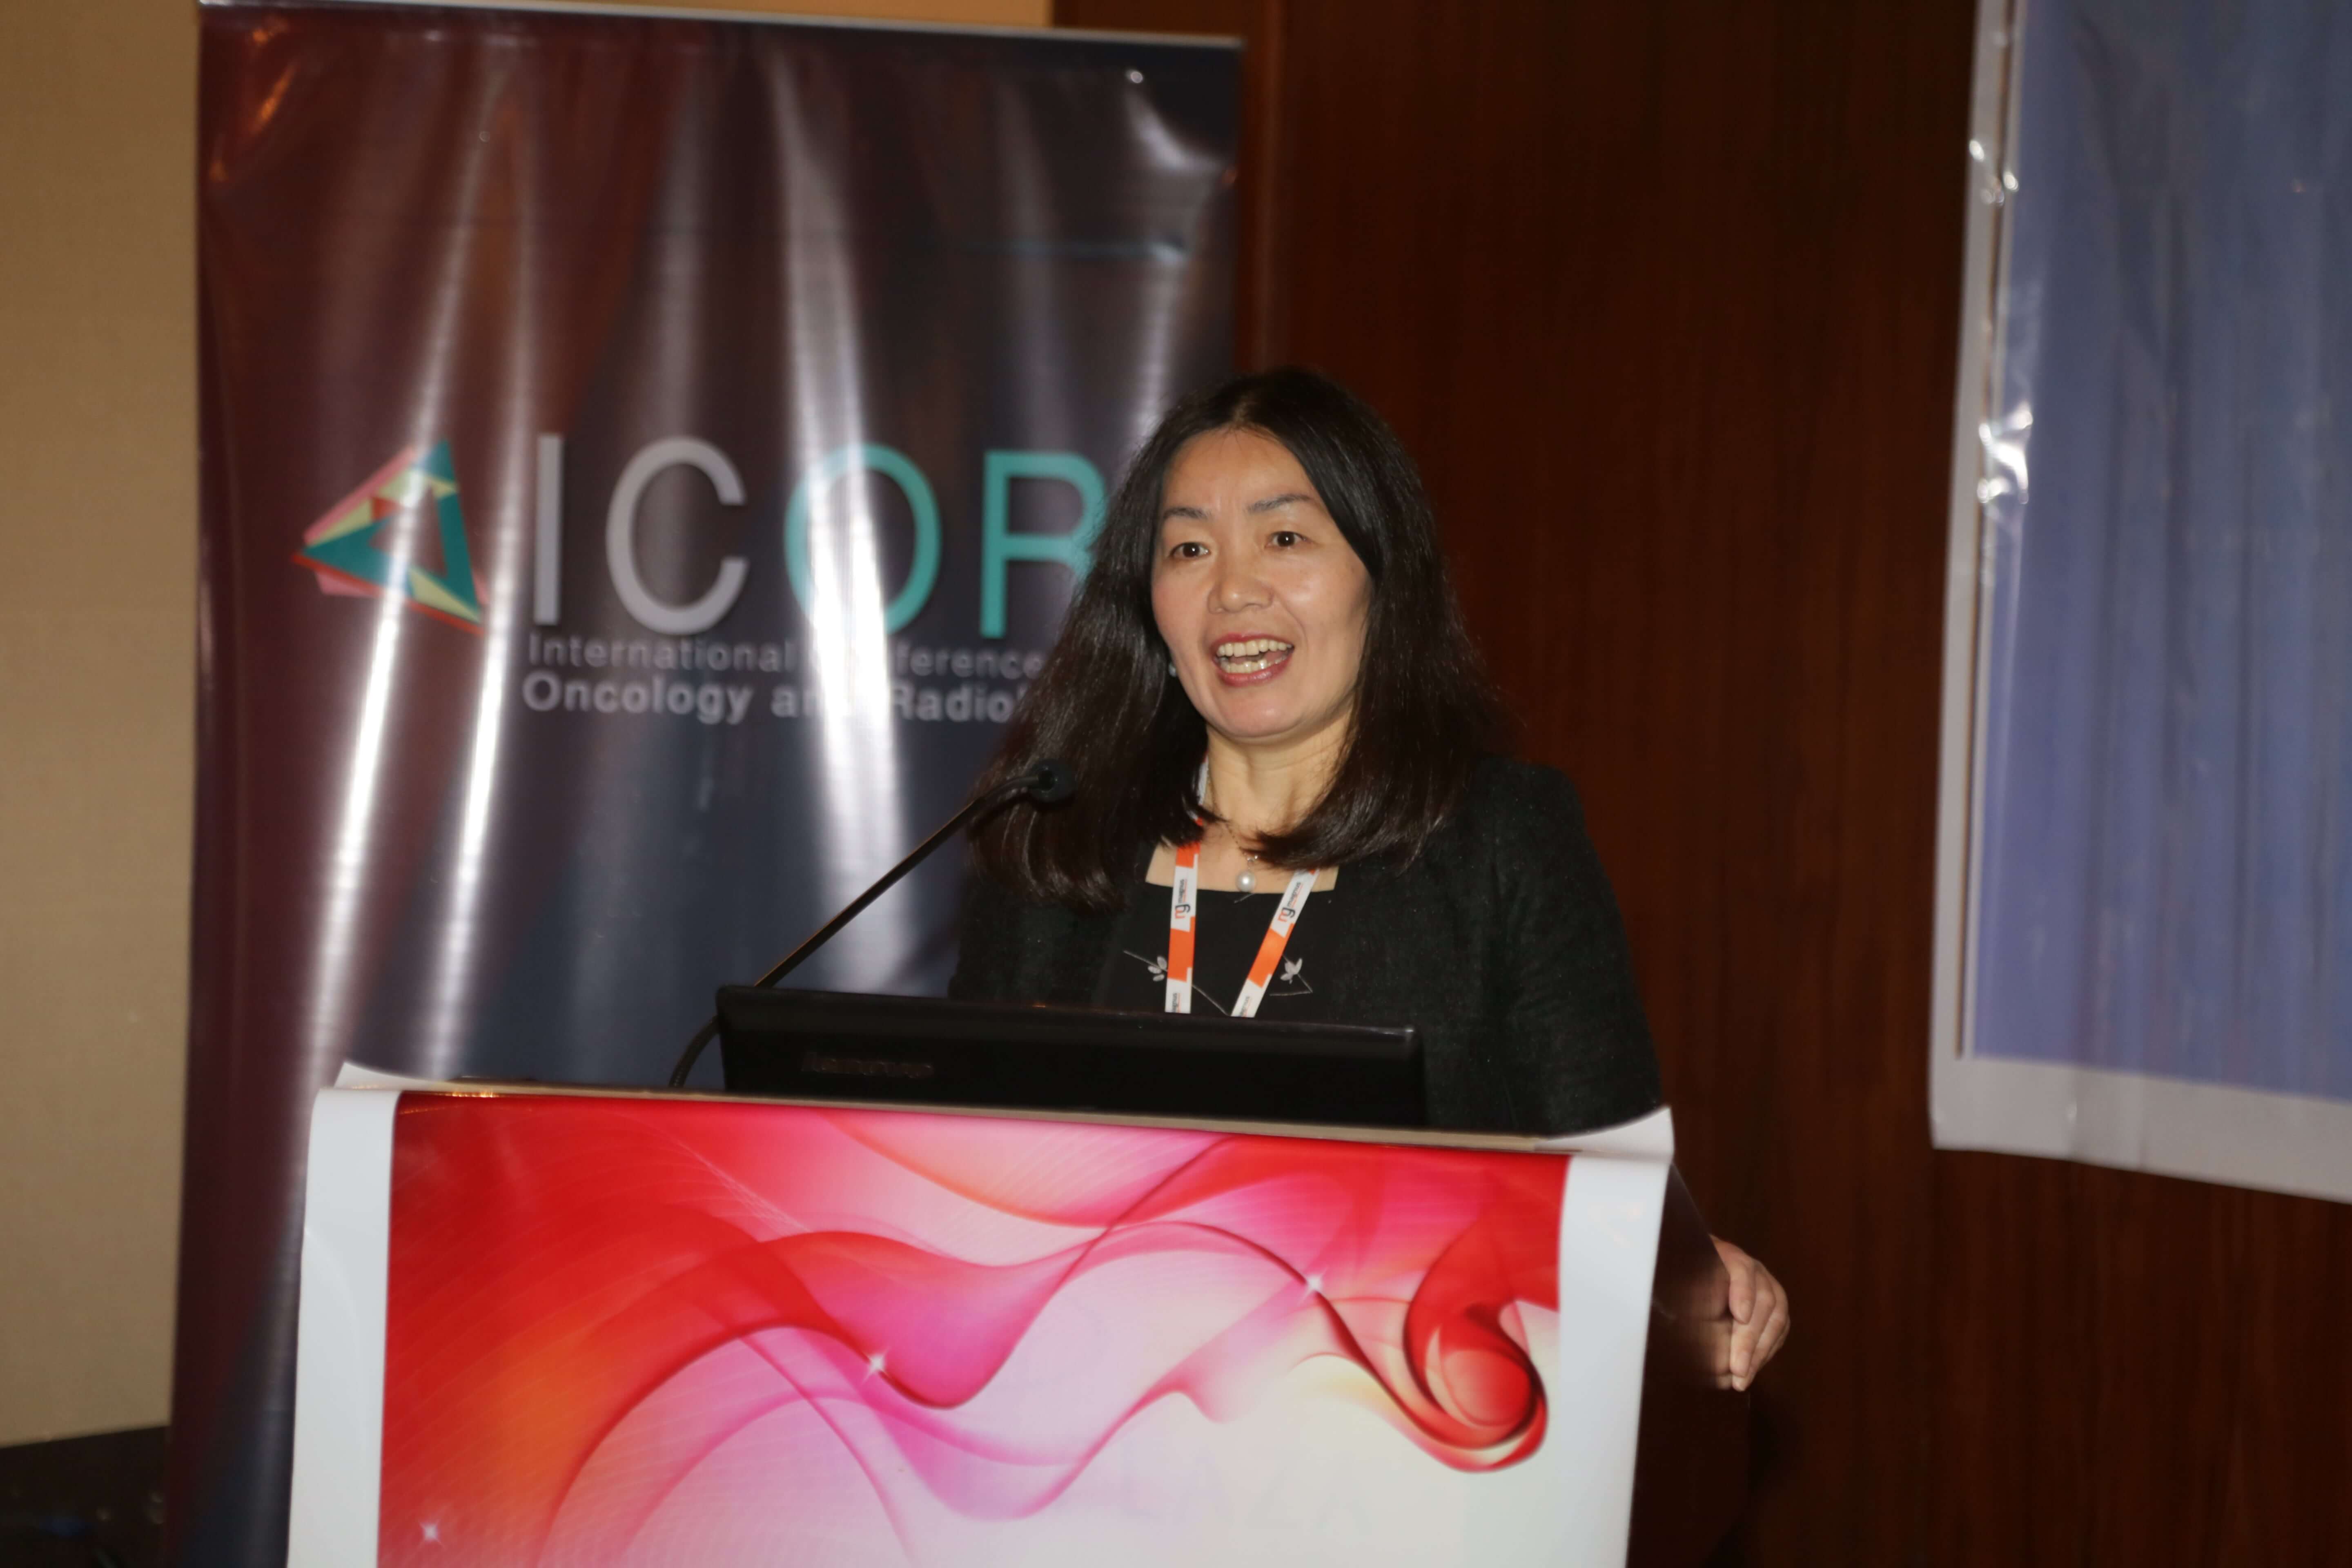 Cancer Conferences - Dr. Xiufen Zheng